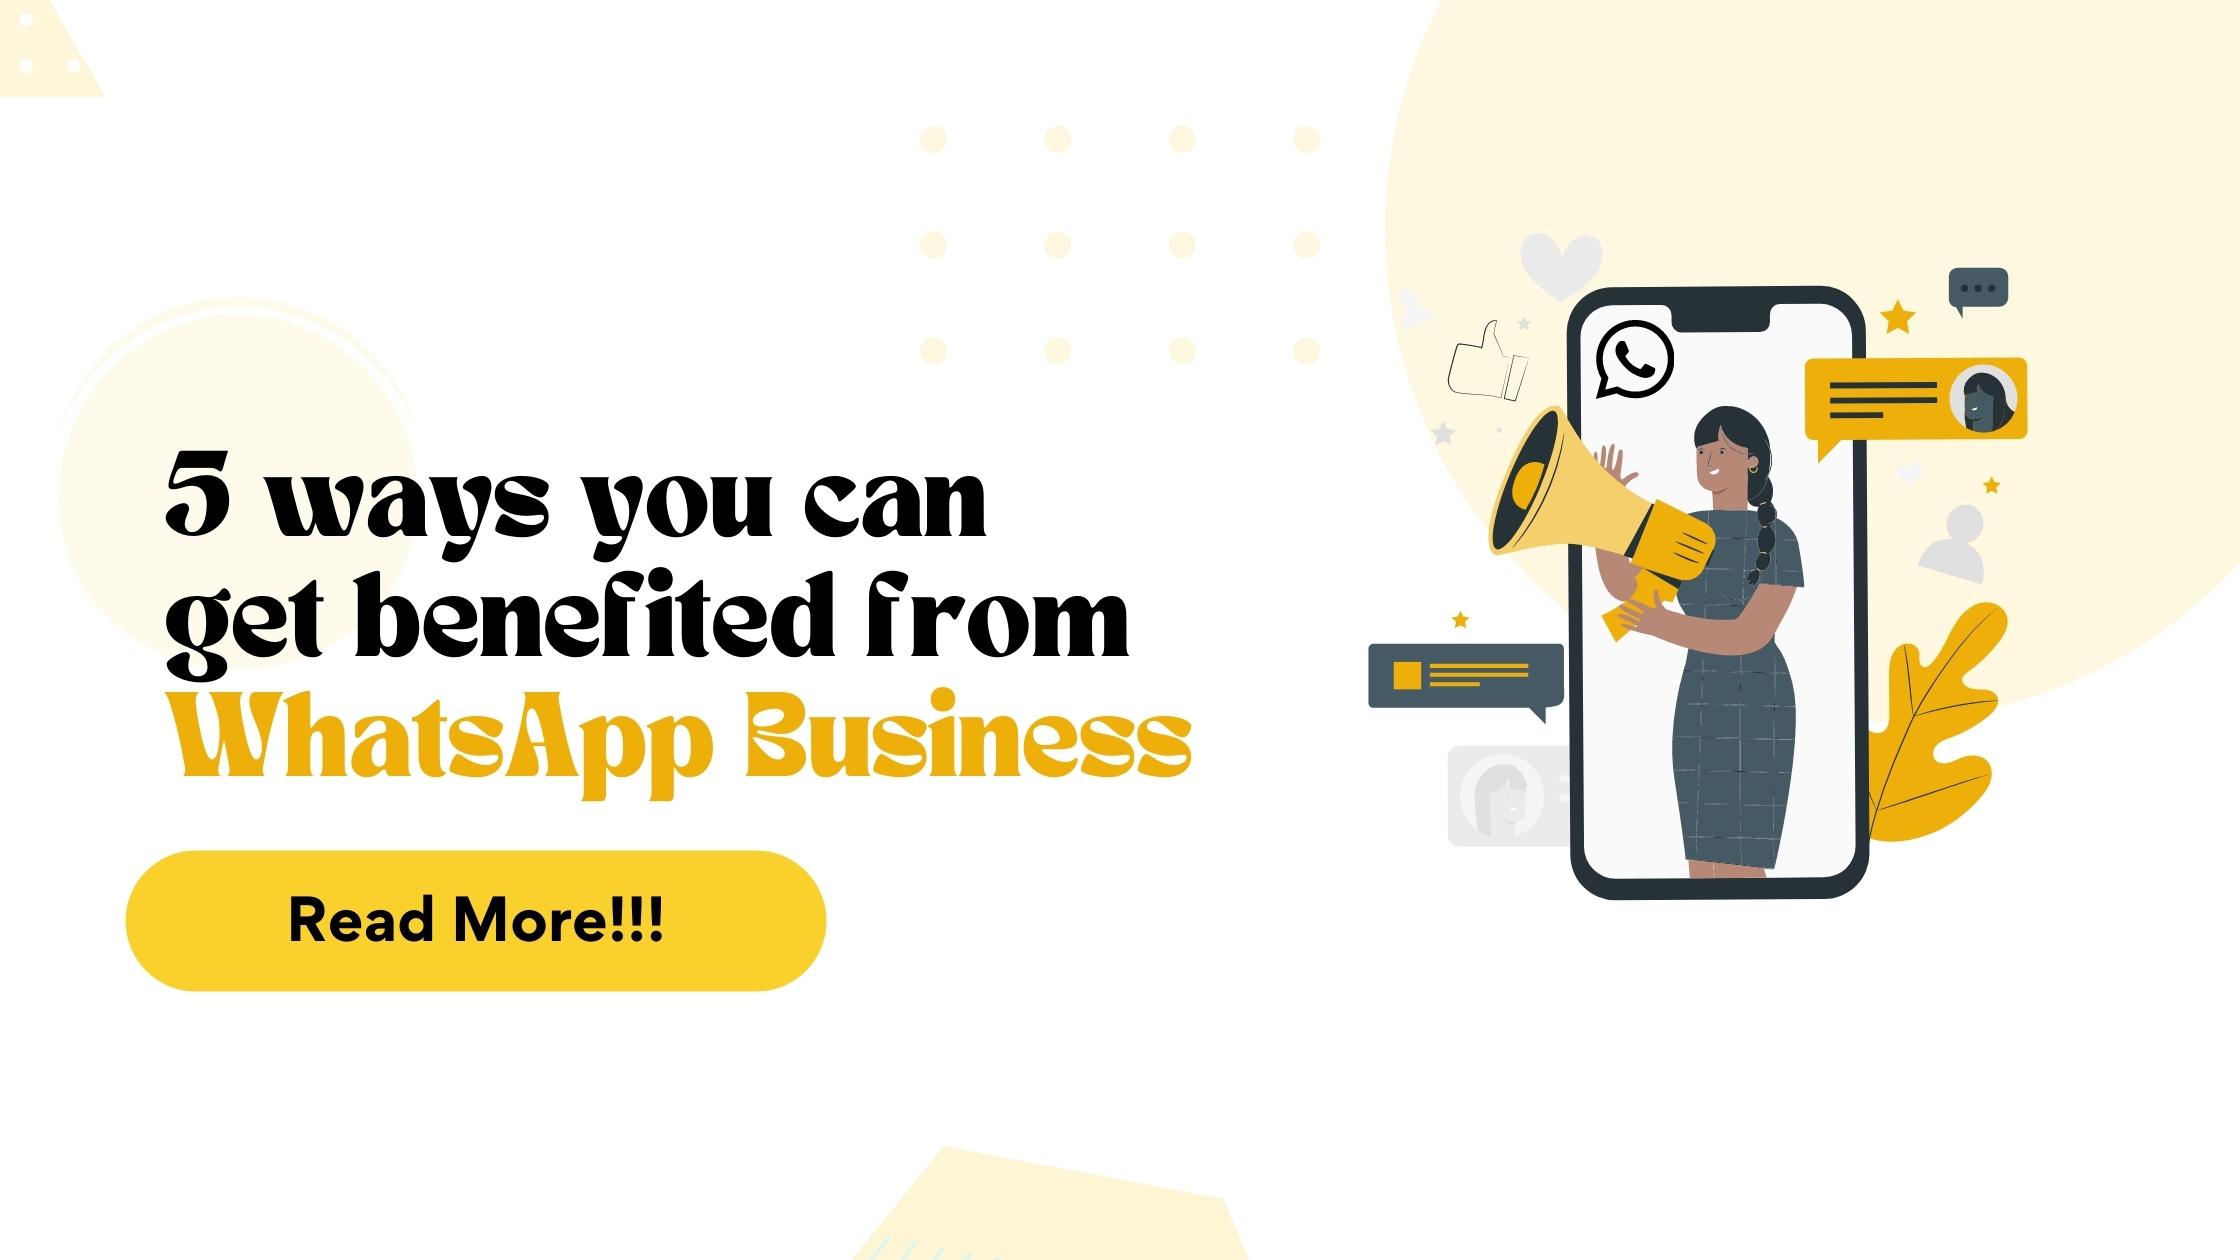 5 WAYS YOU CAN GET BENEFITED FROM WHATSAPP BUSINESS